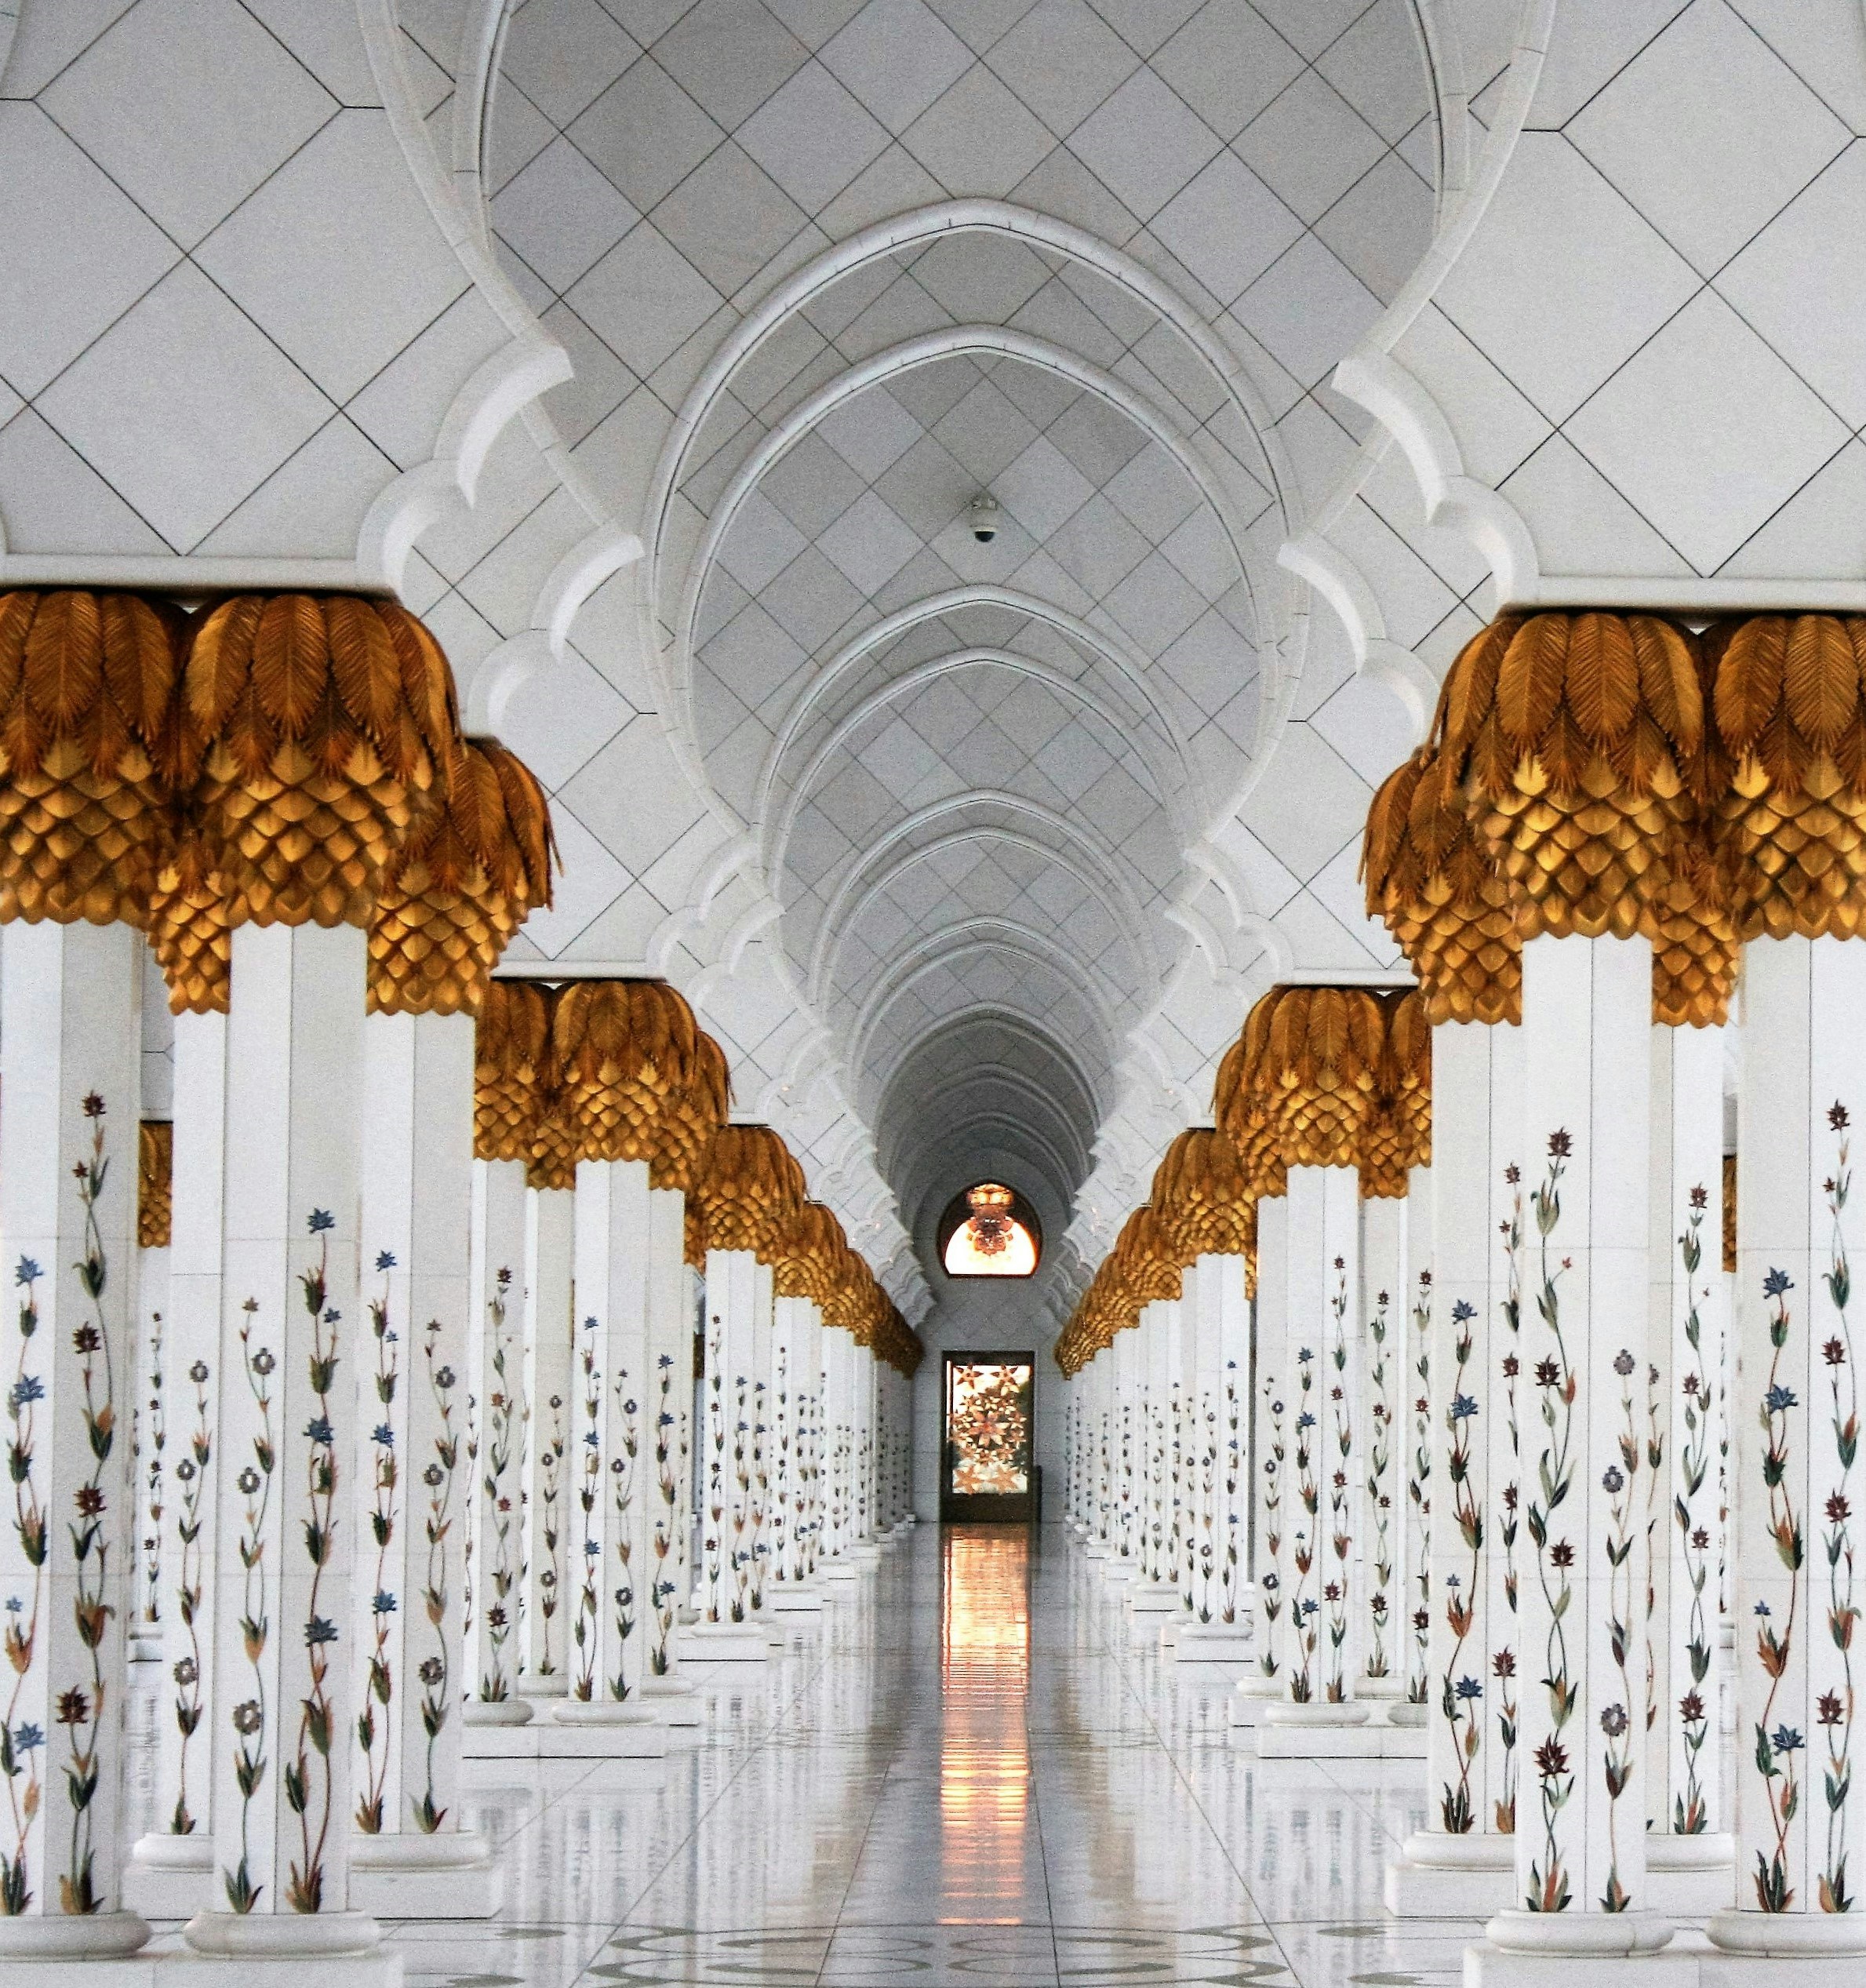 This photo was taken in Sheikh Zayed Mosque in Abu Dhabi, one of the most beautiful mosques i have ever been to. a must visit. The amount of Architecture and handcraft is astonishing. highly recommended.